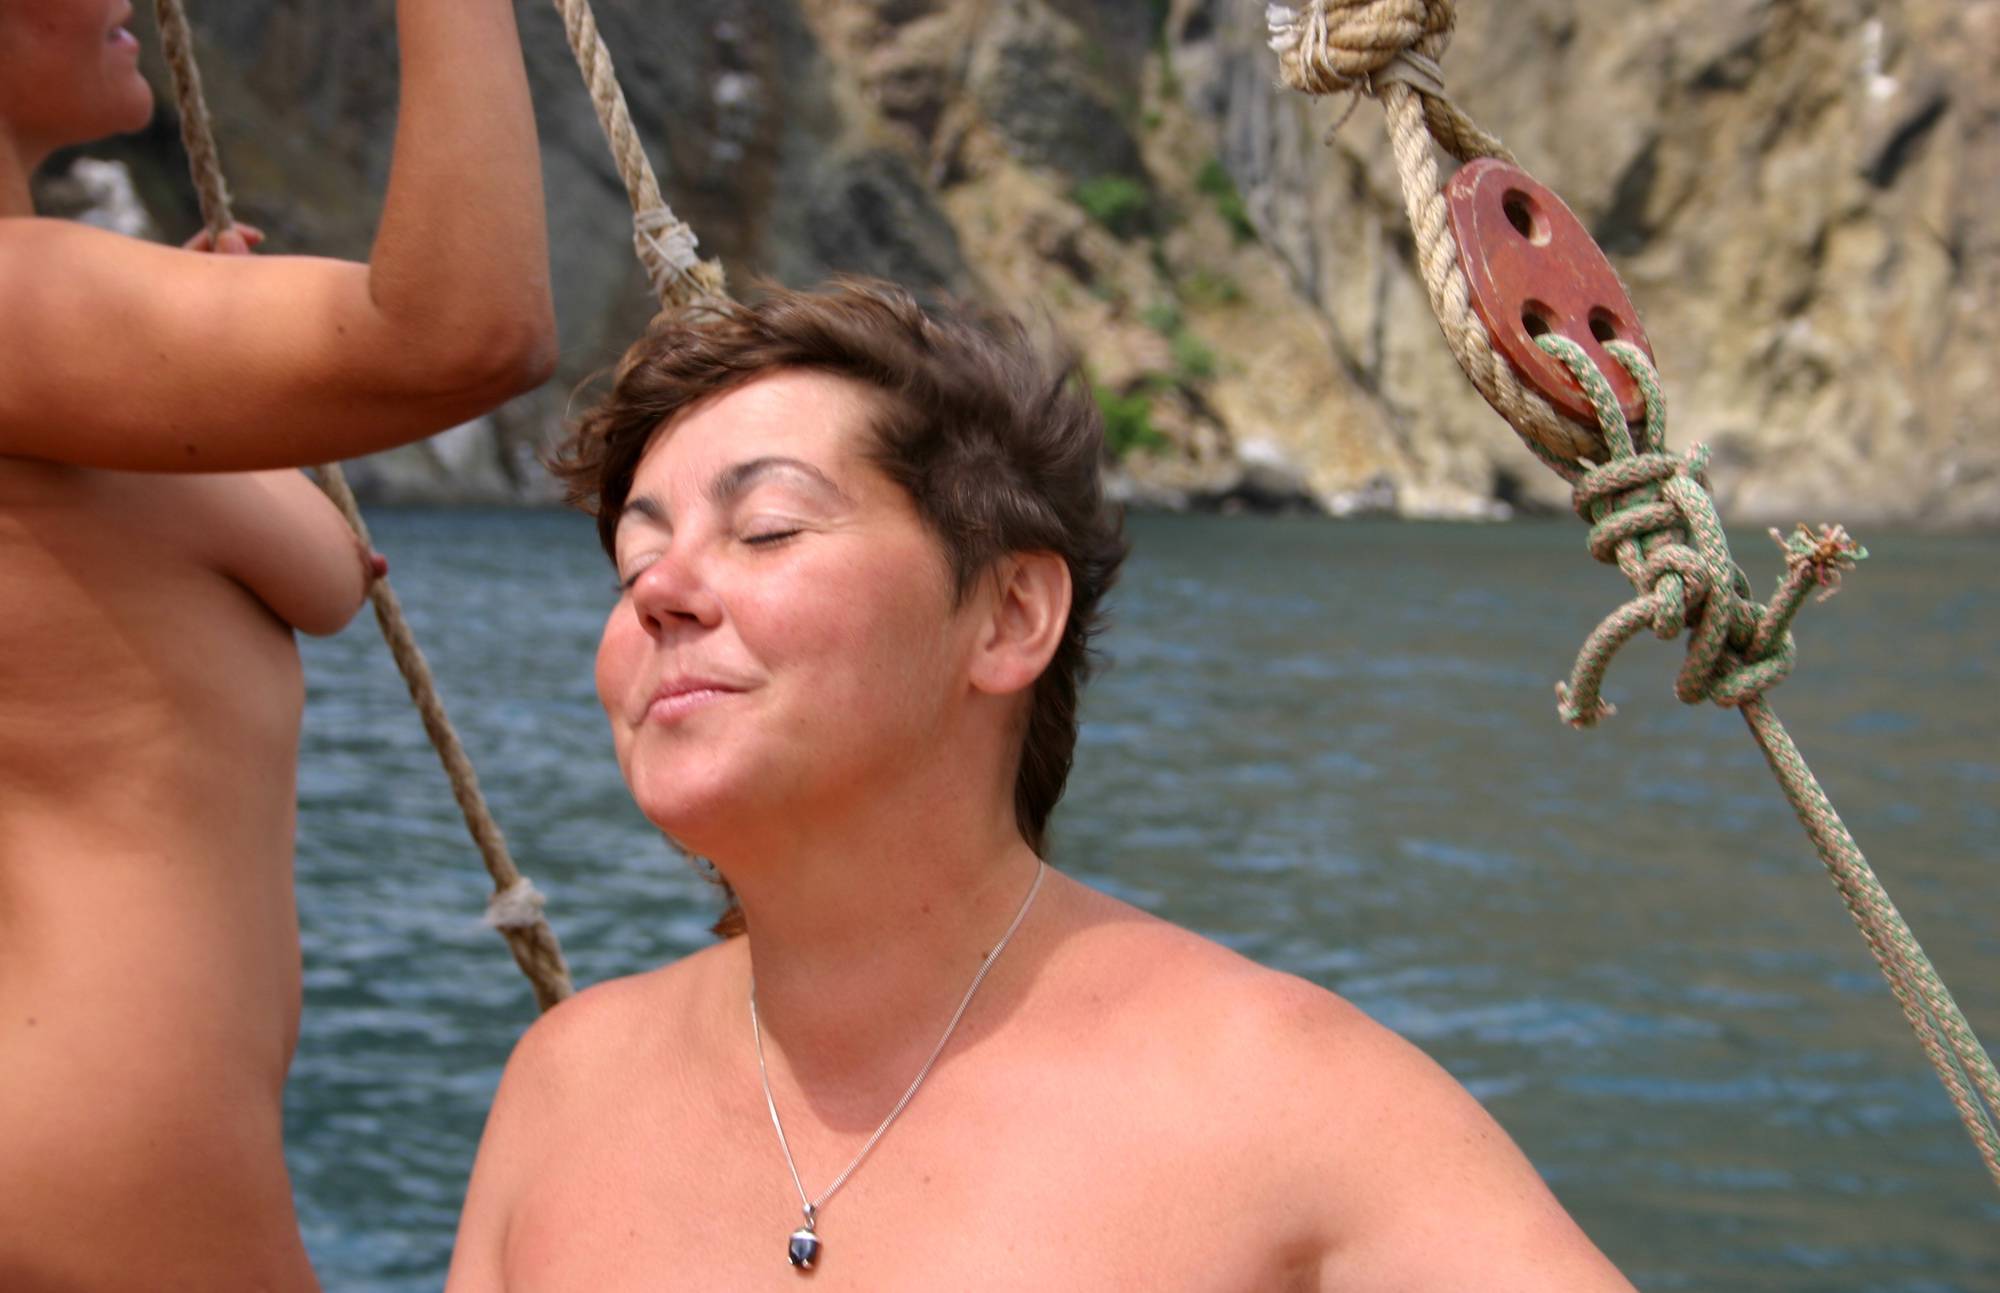 Nudist Photos Boating Sail and Relaxation - 1